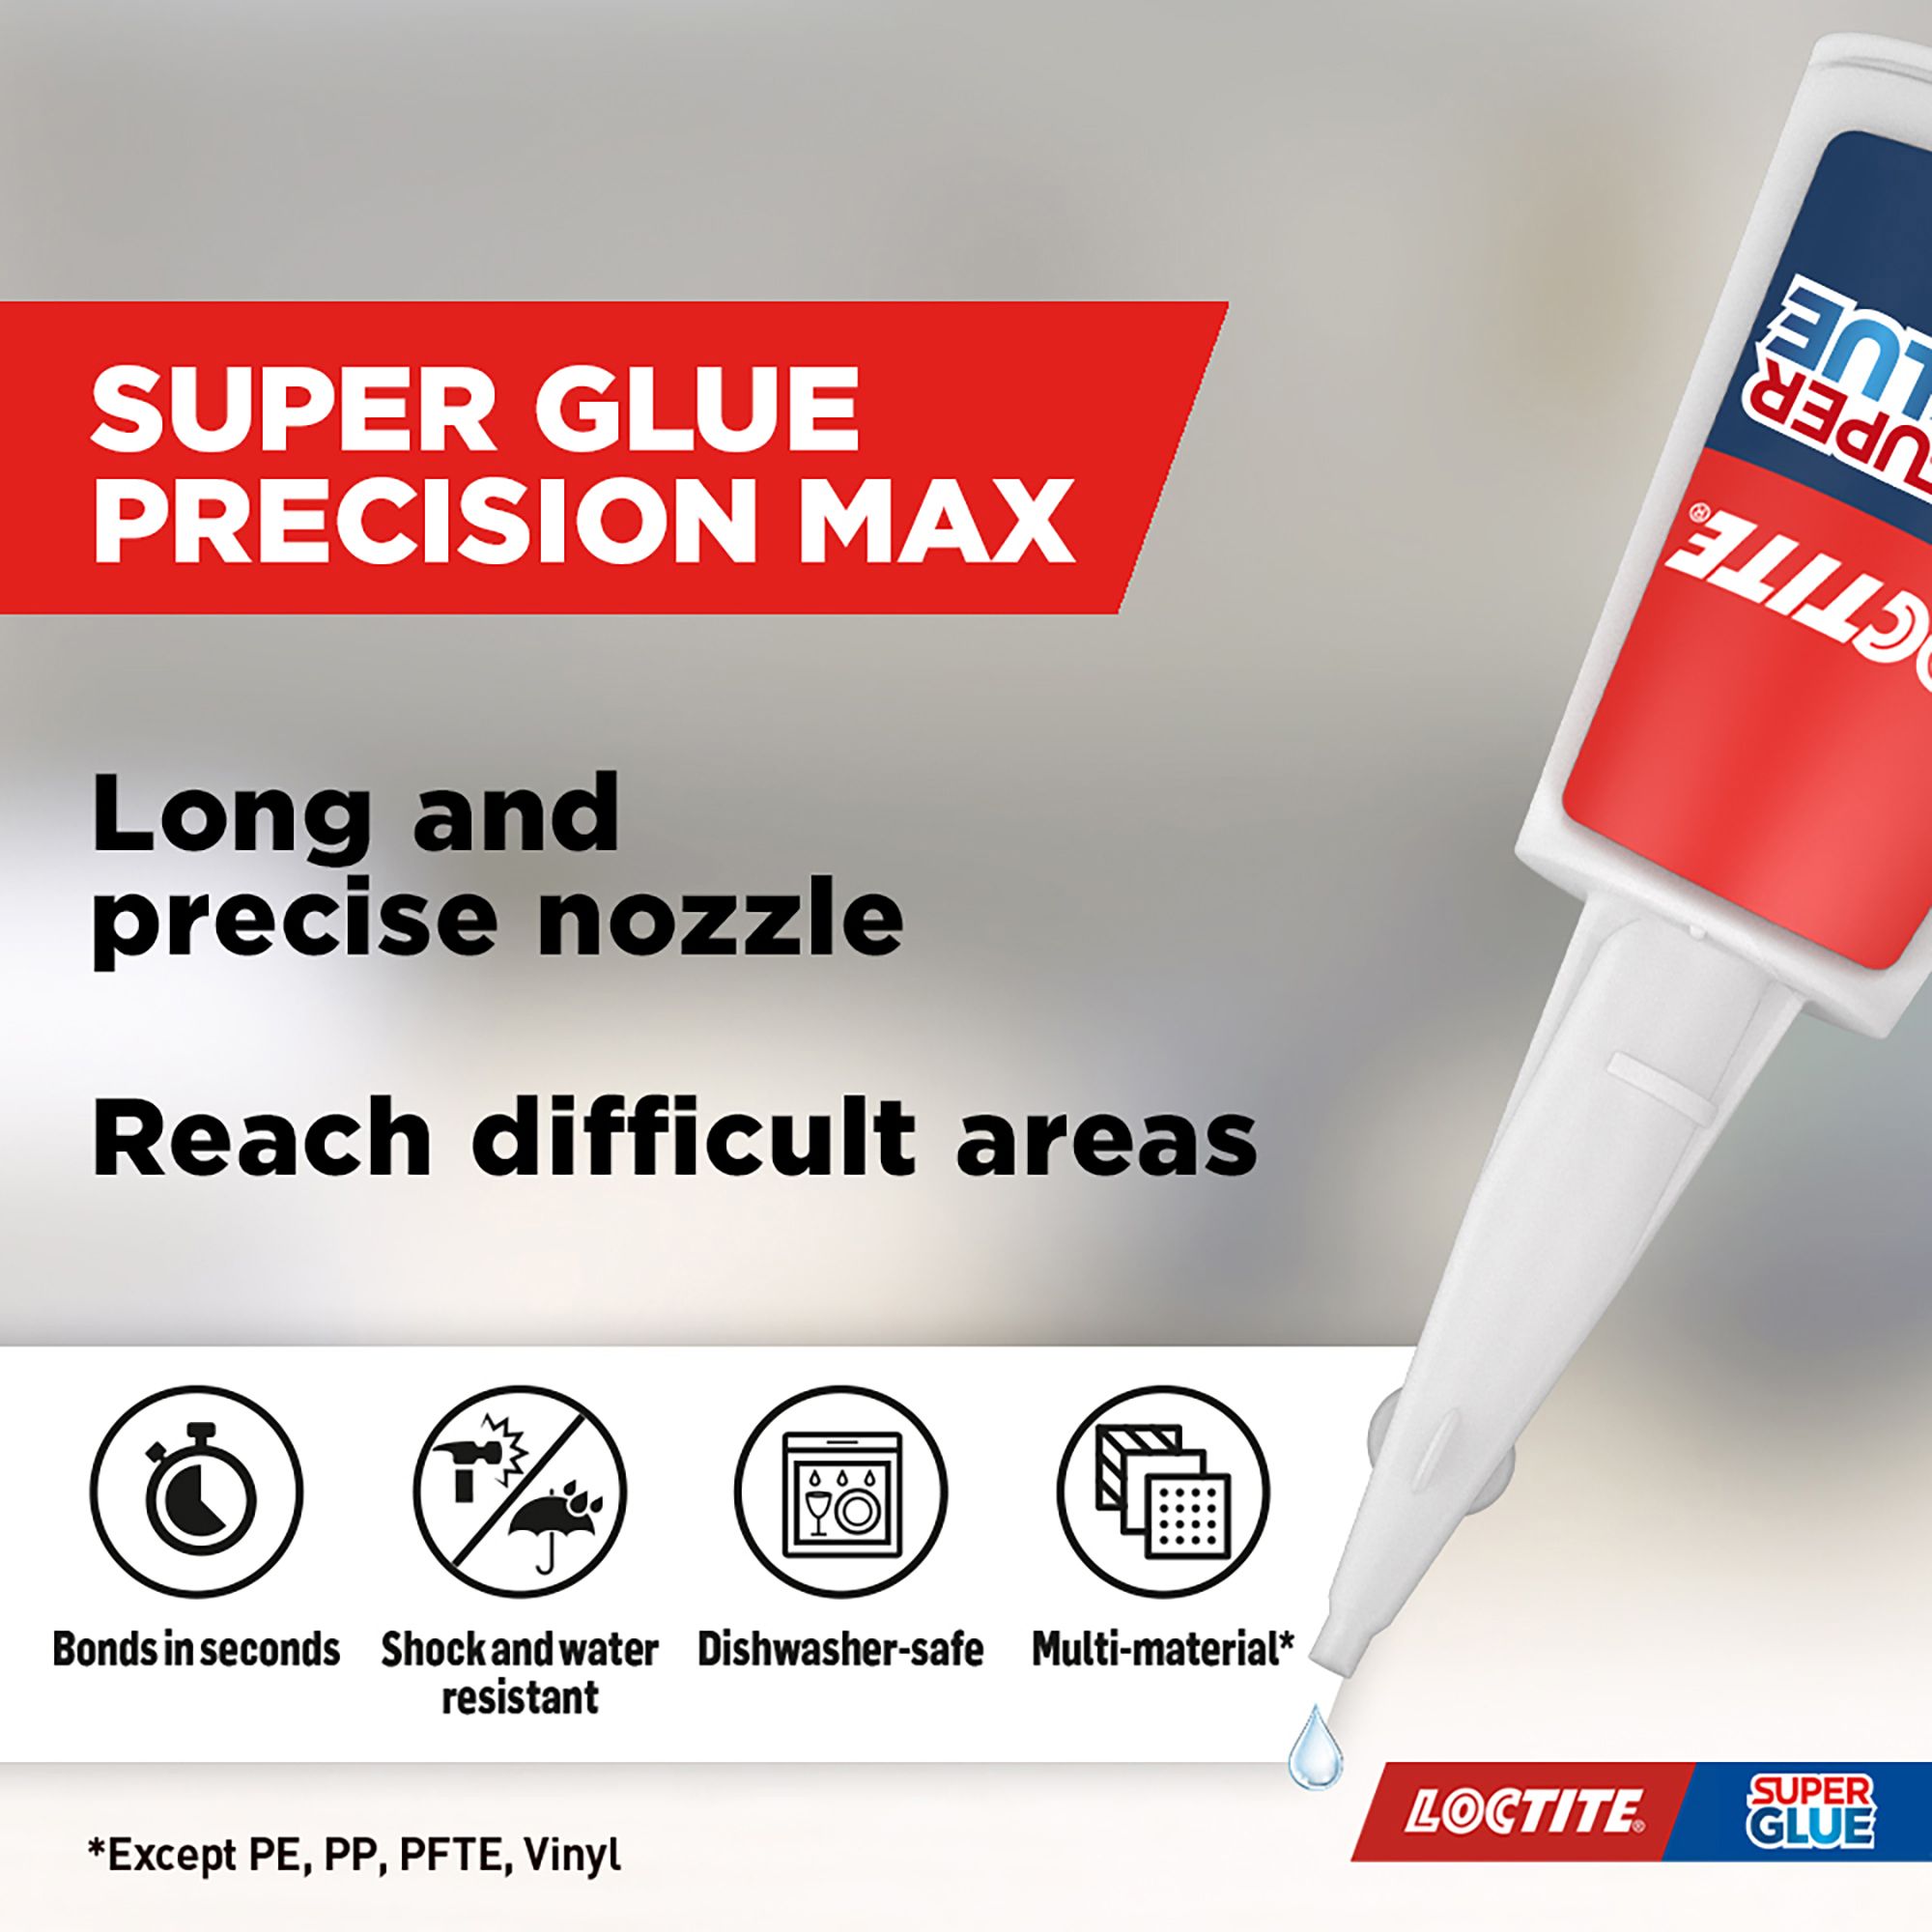 3 Packs Loctite Superglue 3 Precision MAX Precision Instant Adhesive  Glue-Extra Long Nozzle Cyanocrylate Glue for Hard-to-Access Area -  AliExpress